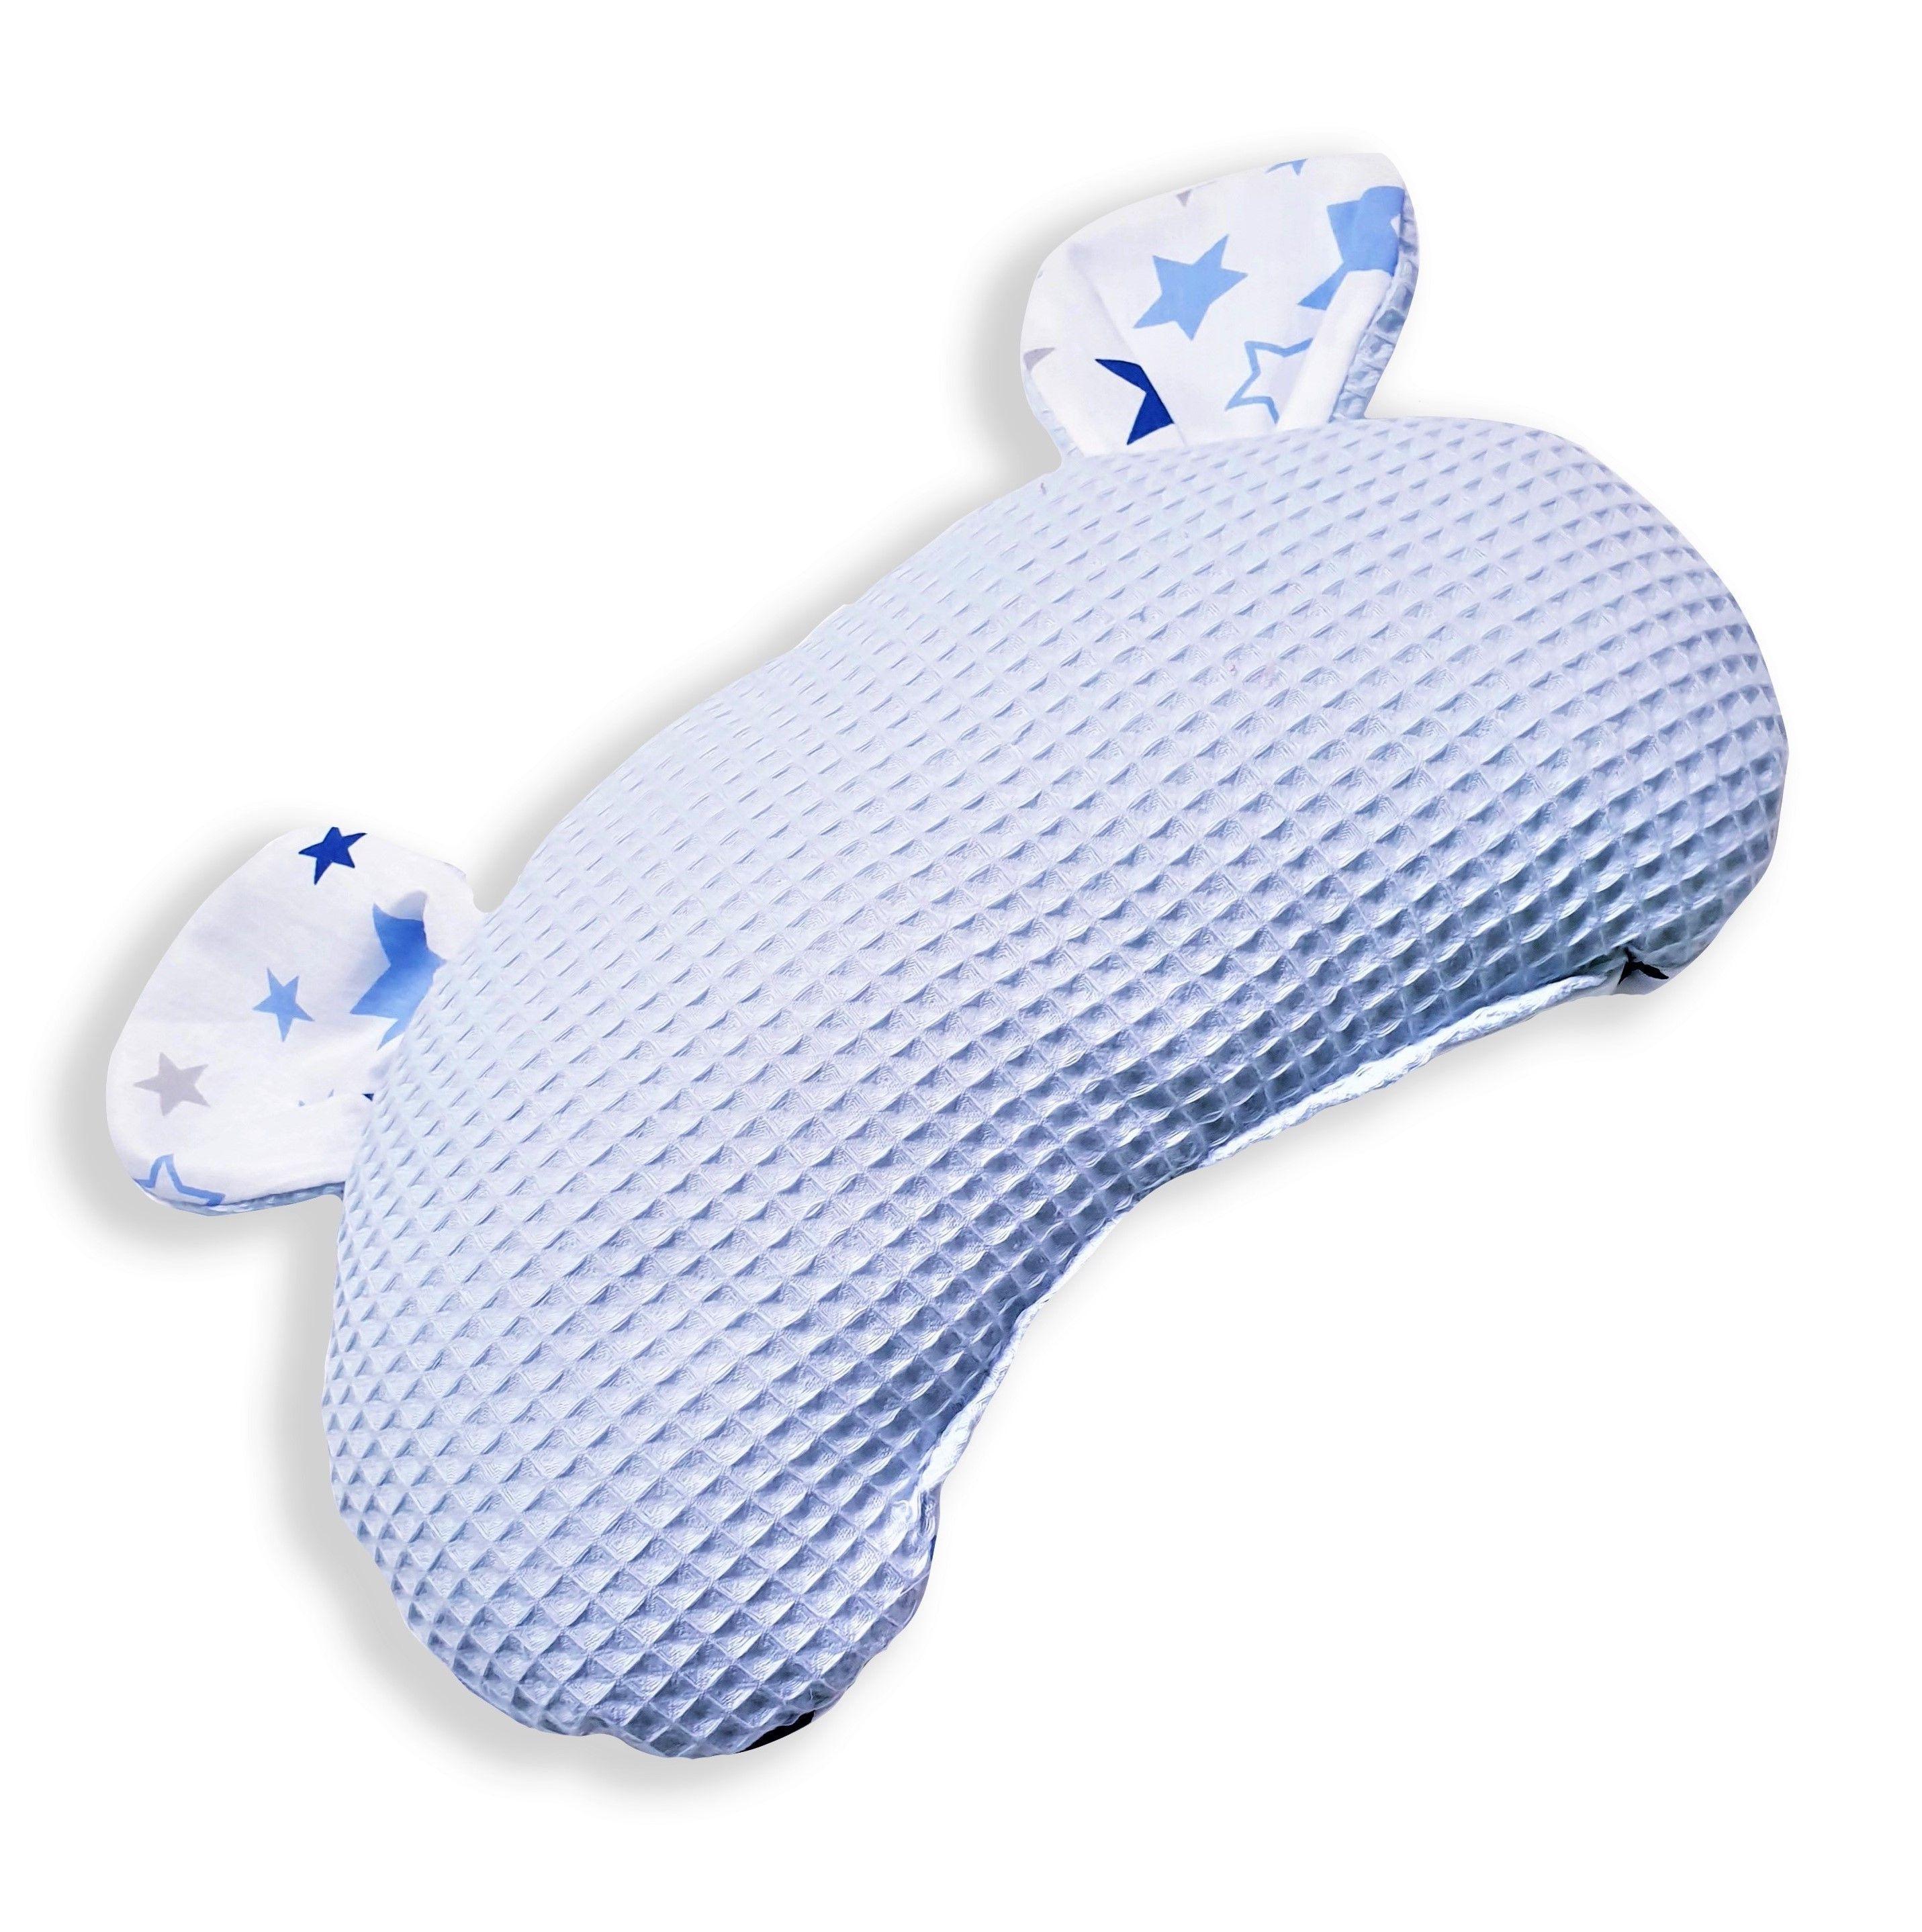 Baby cocoon 6in1 - blue stars, POLISH PRODUCT 100% COTTON